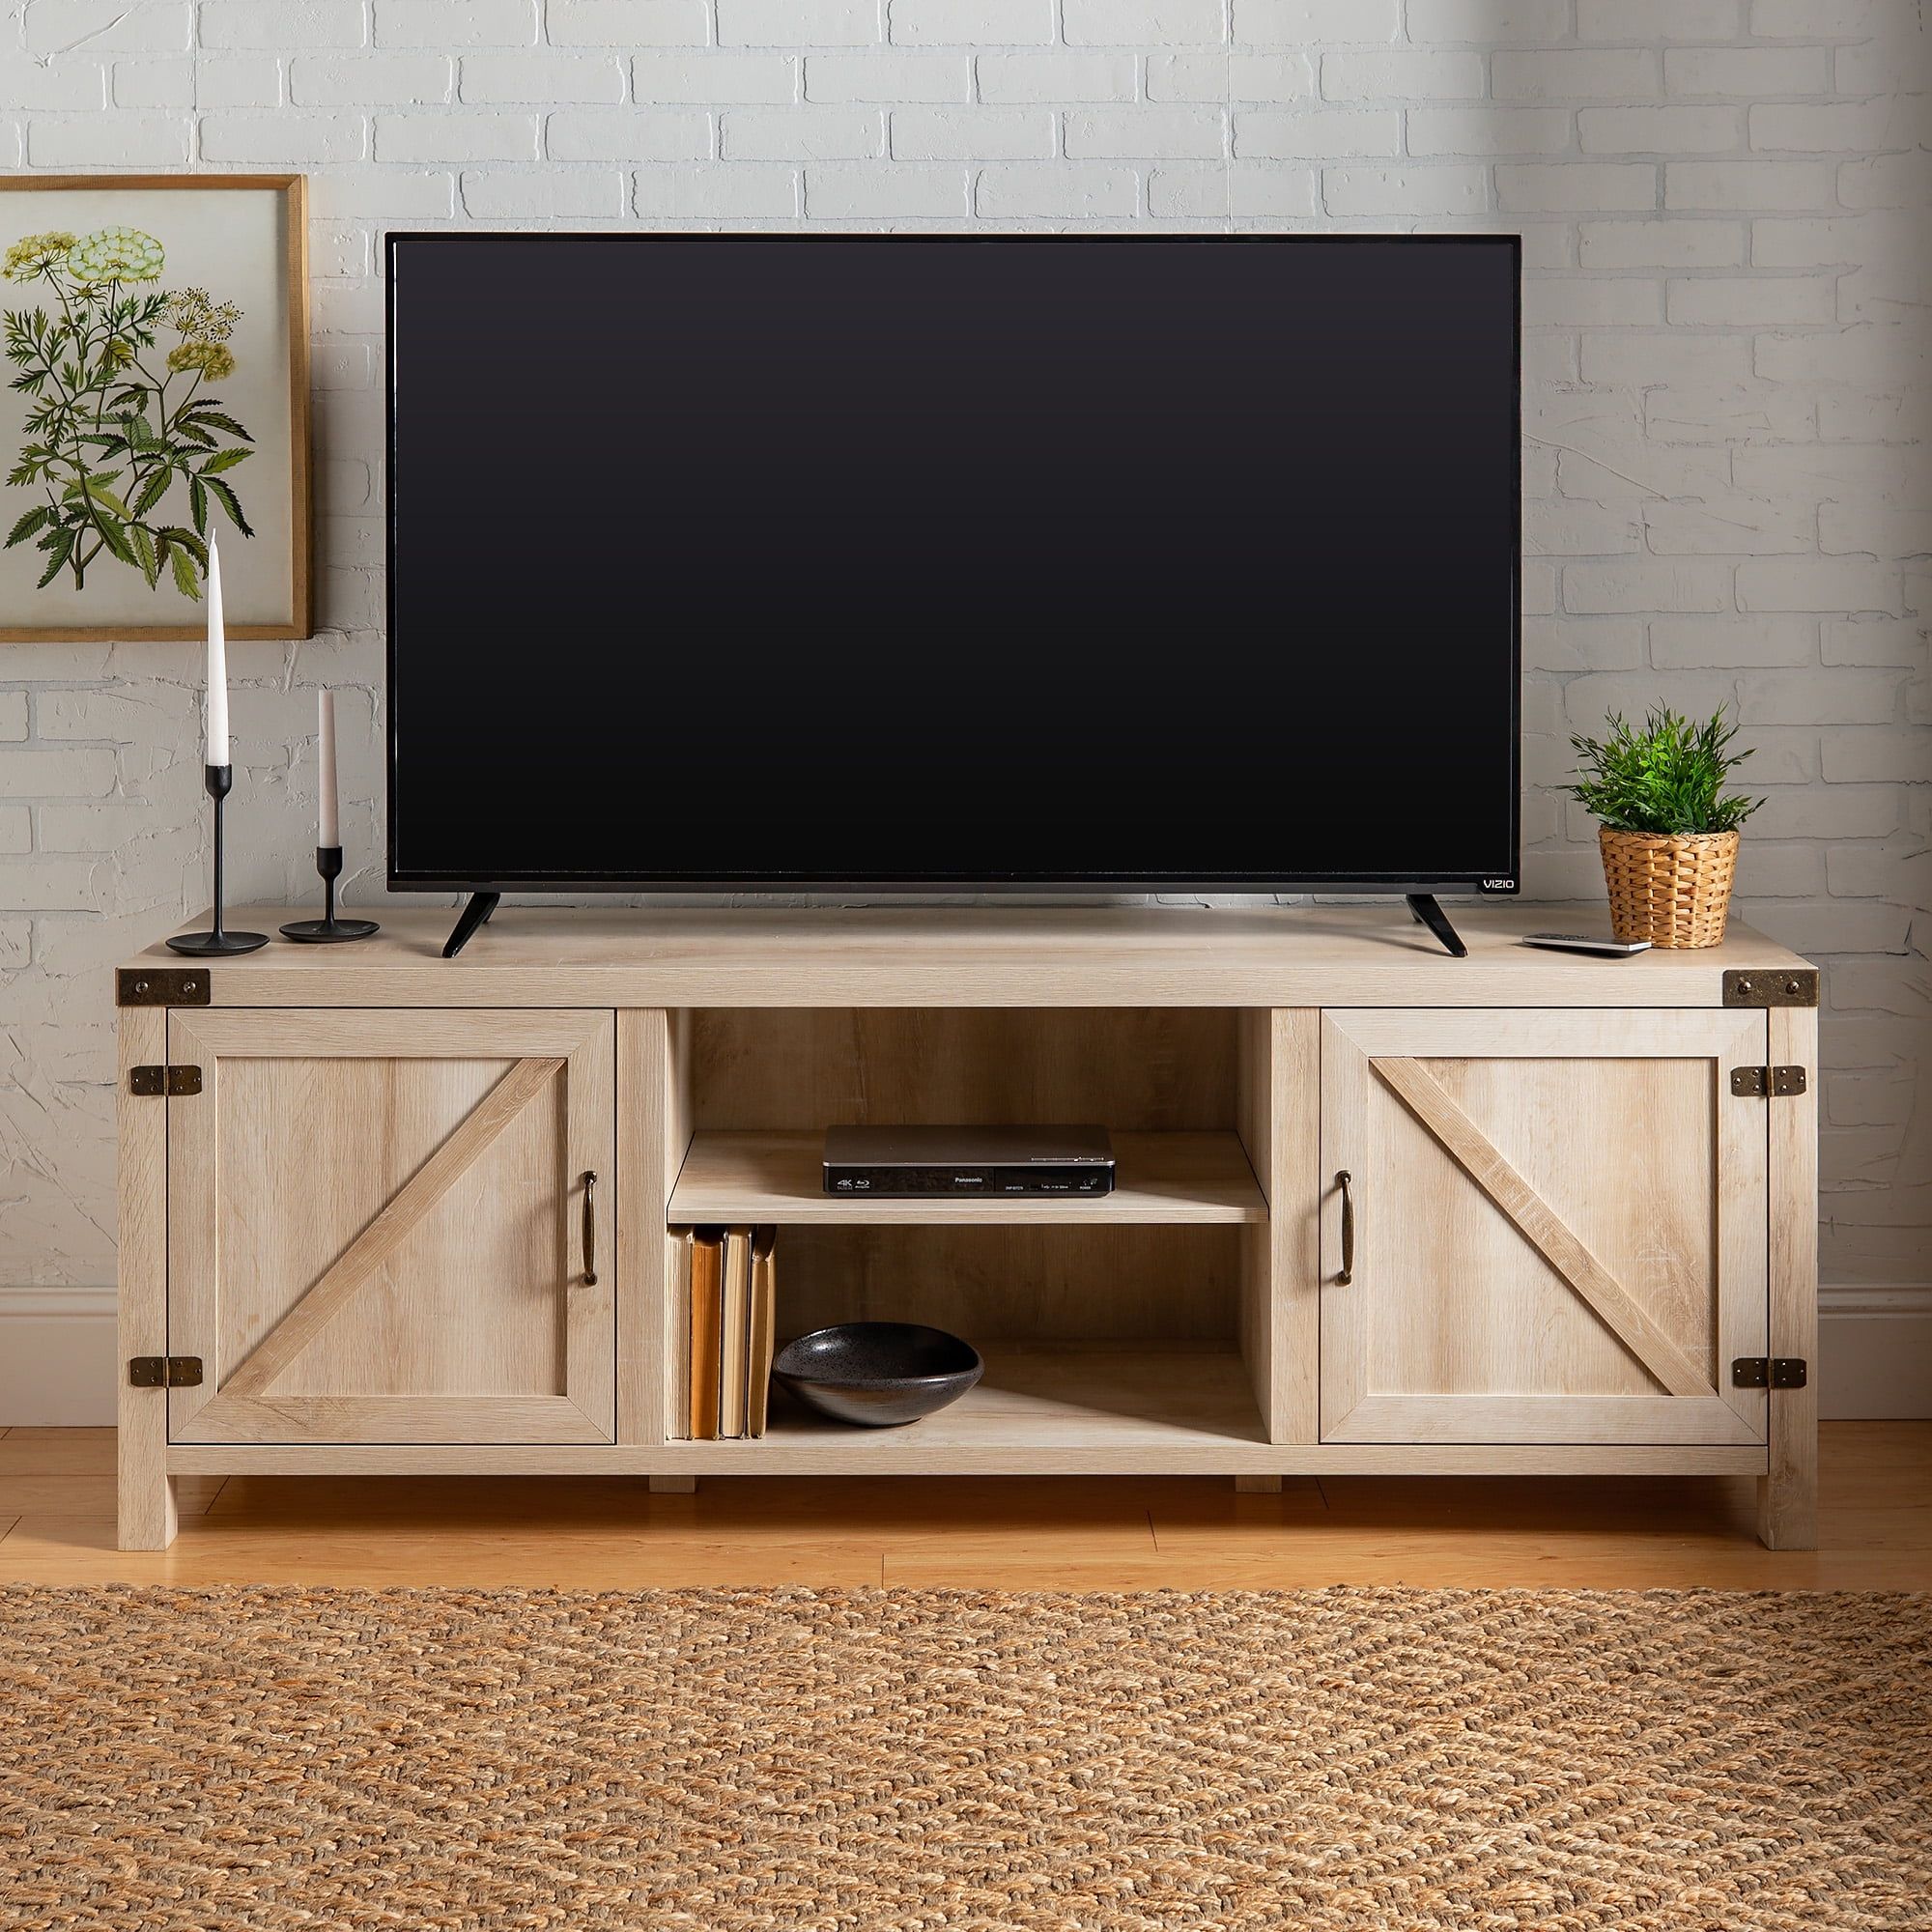 Woven Paths Farmhouse Barn Door Tv Stand For Tvs Up To 80", White Oak In Farmhouse Stands For Tvs (Gallery 2 of 20)